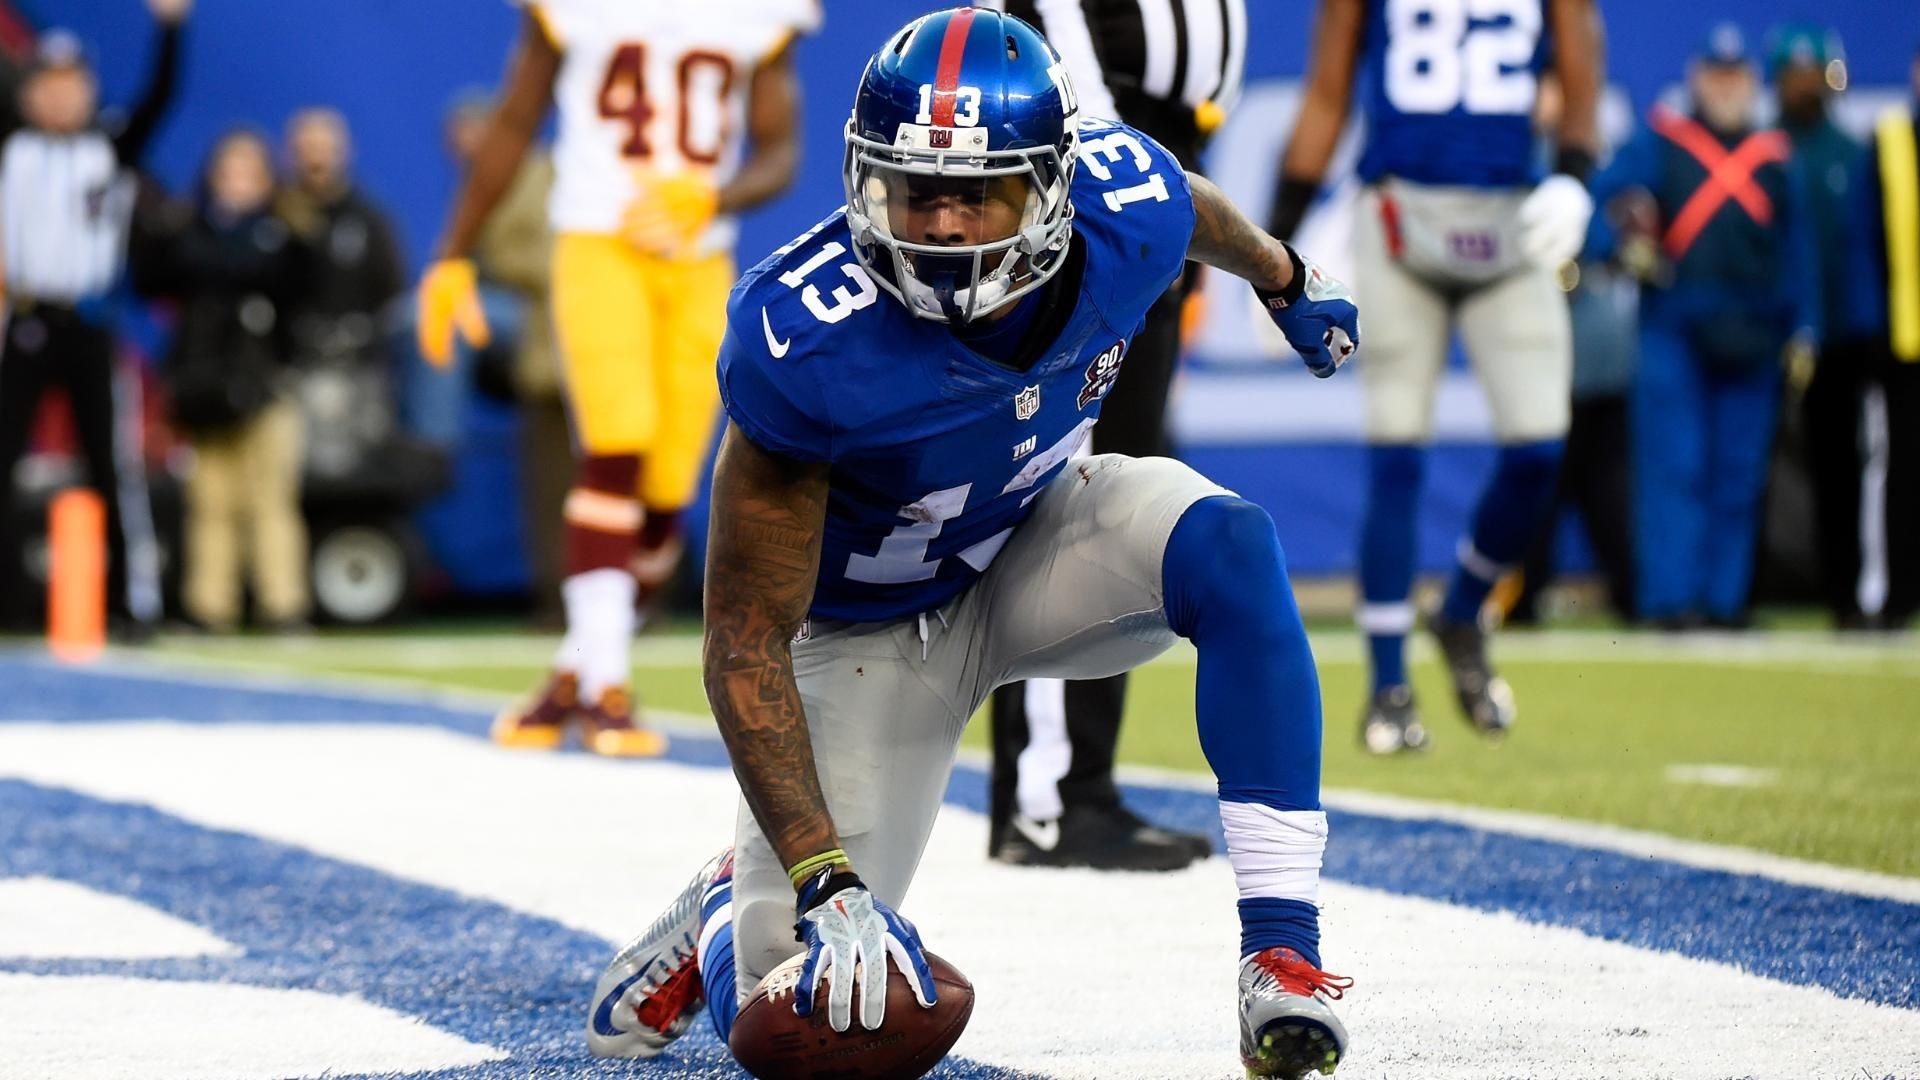 1920x1080 Odell Beckham JR 1080p Background http://wallpapers-and-backgrounds.net